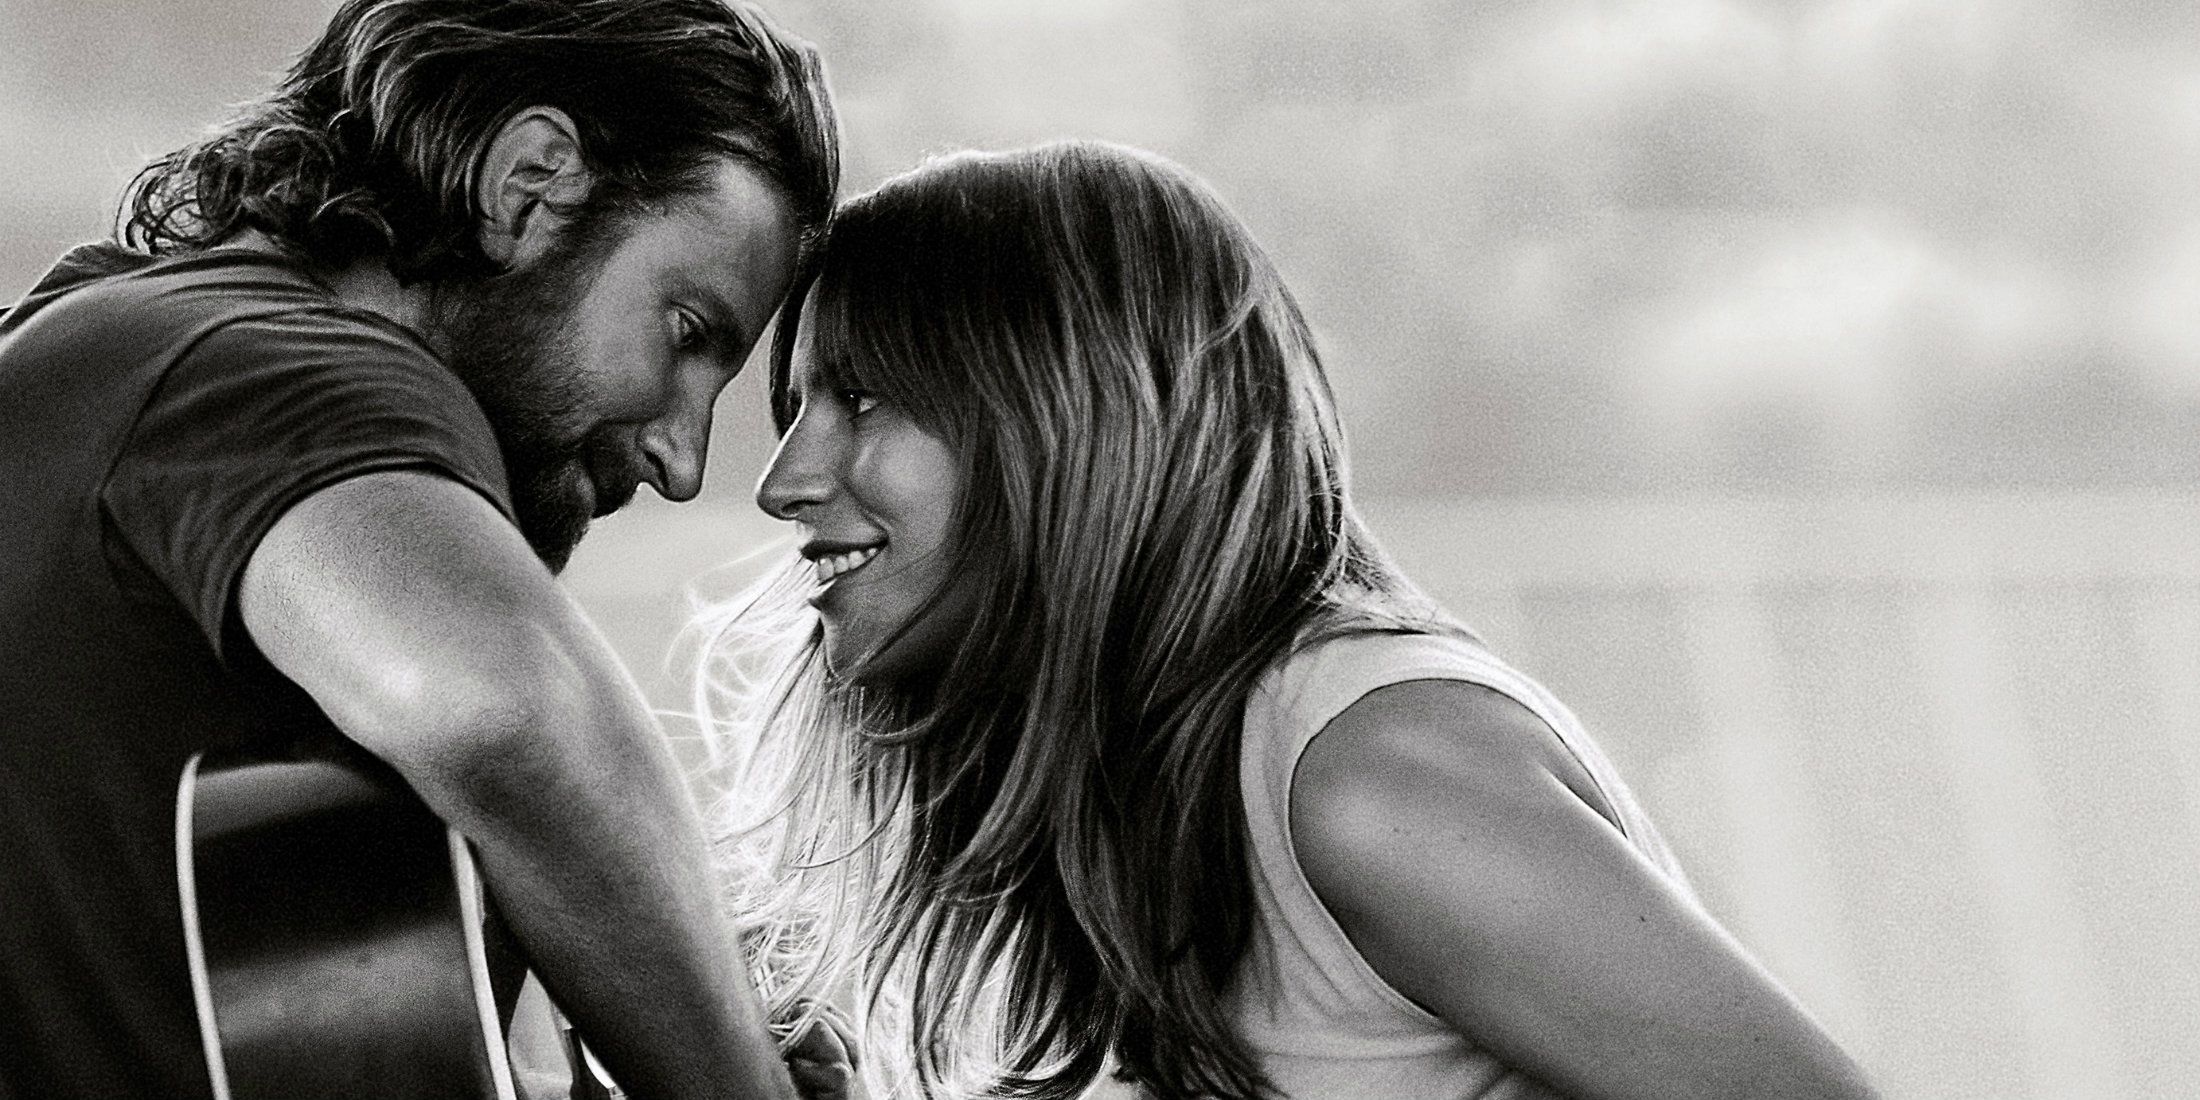 A Star Is Born poster featuring Bradley Cooper playing a guitar while staring into Lady Gaga's eyes